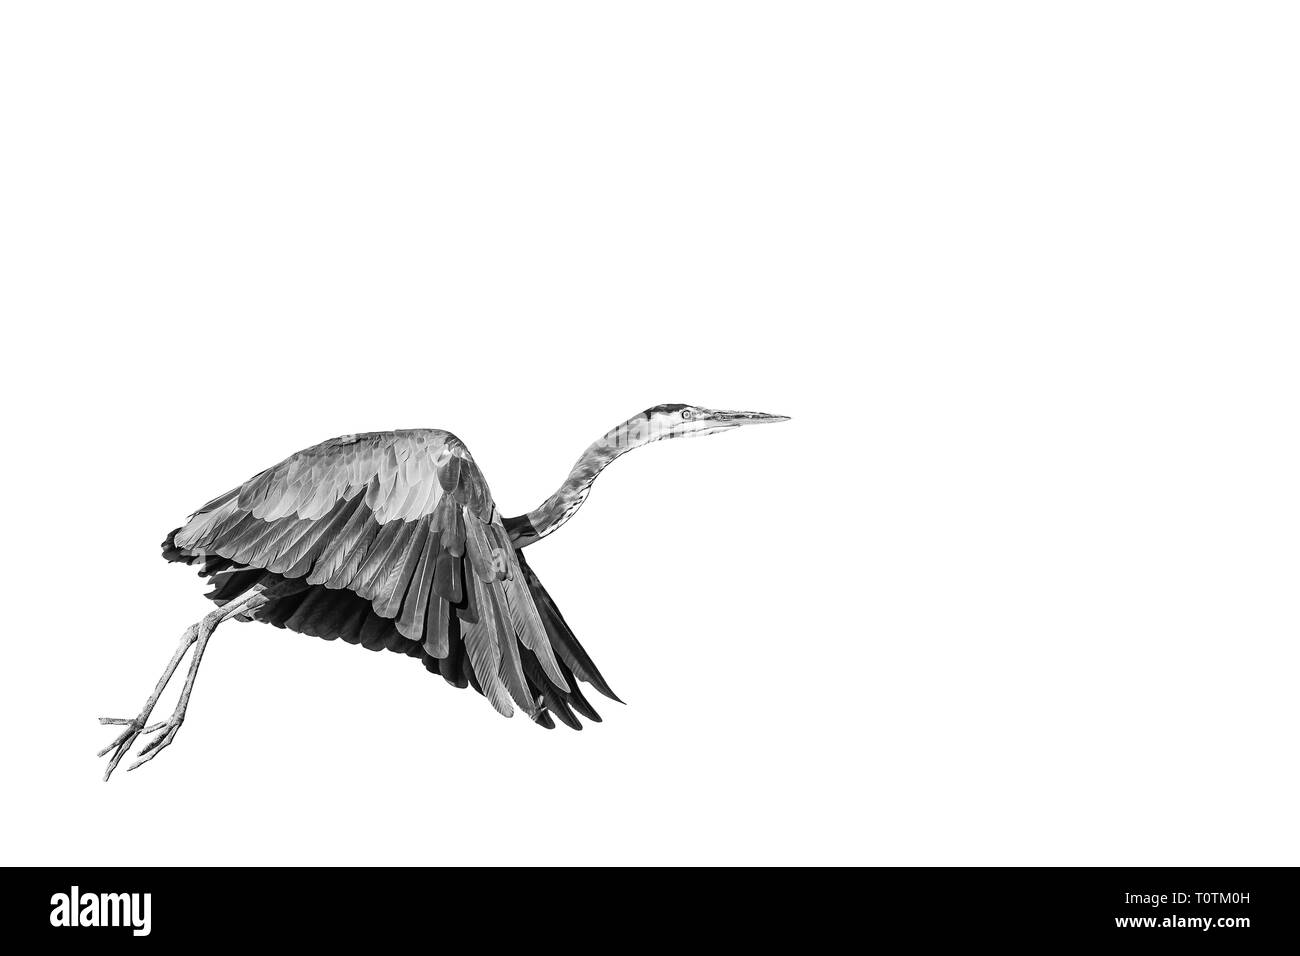 Black and White portrait of a Great Blue Heron in flight on a blank white background. Stock Photo